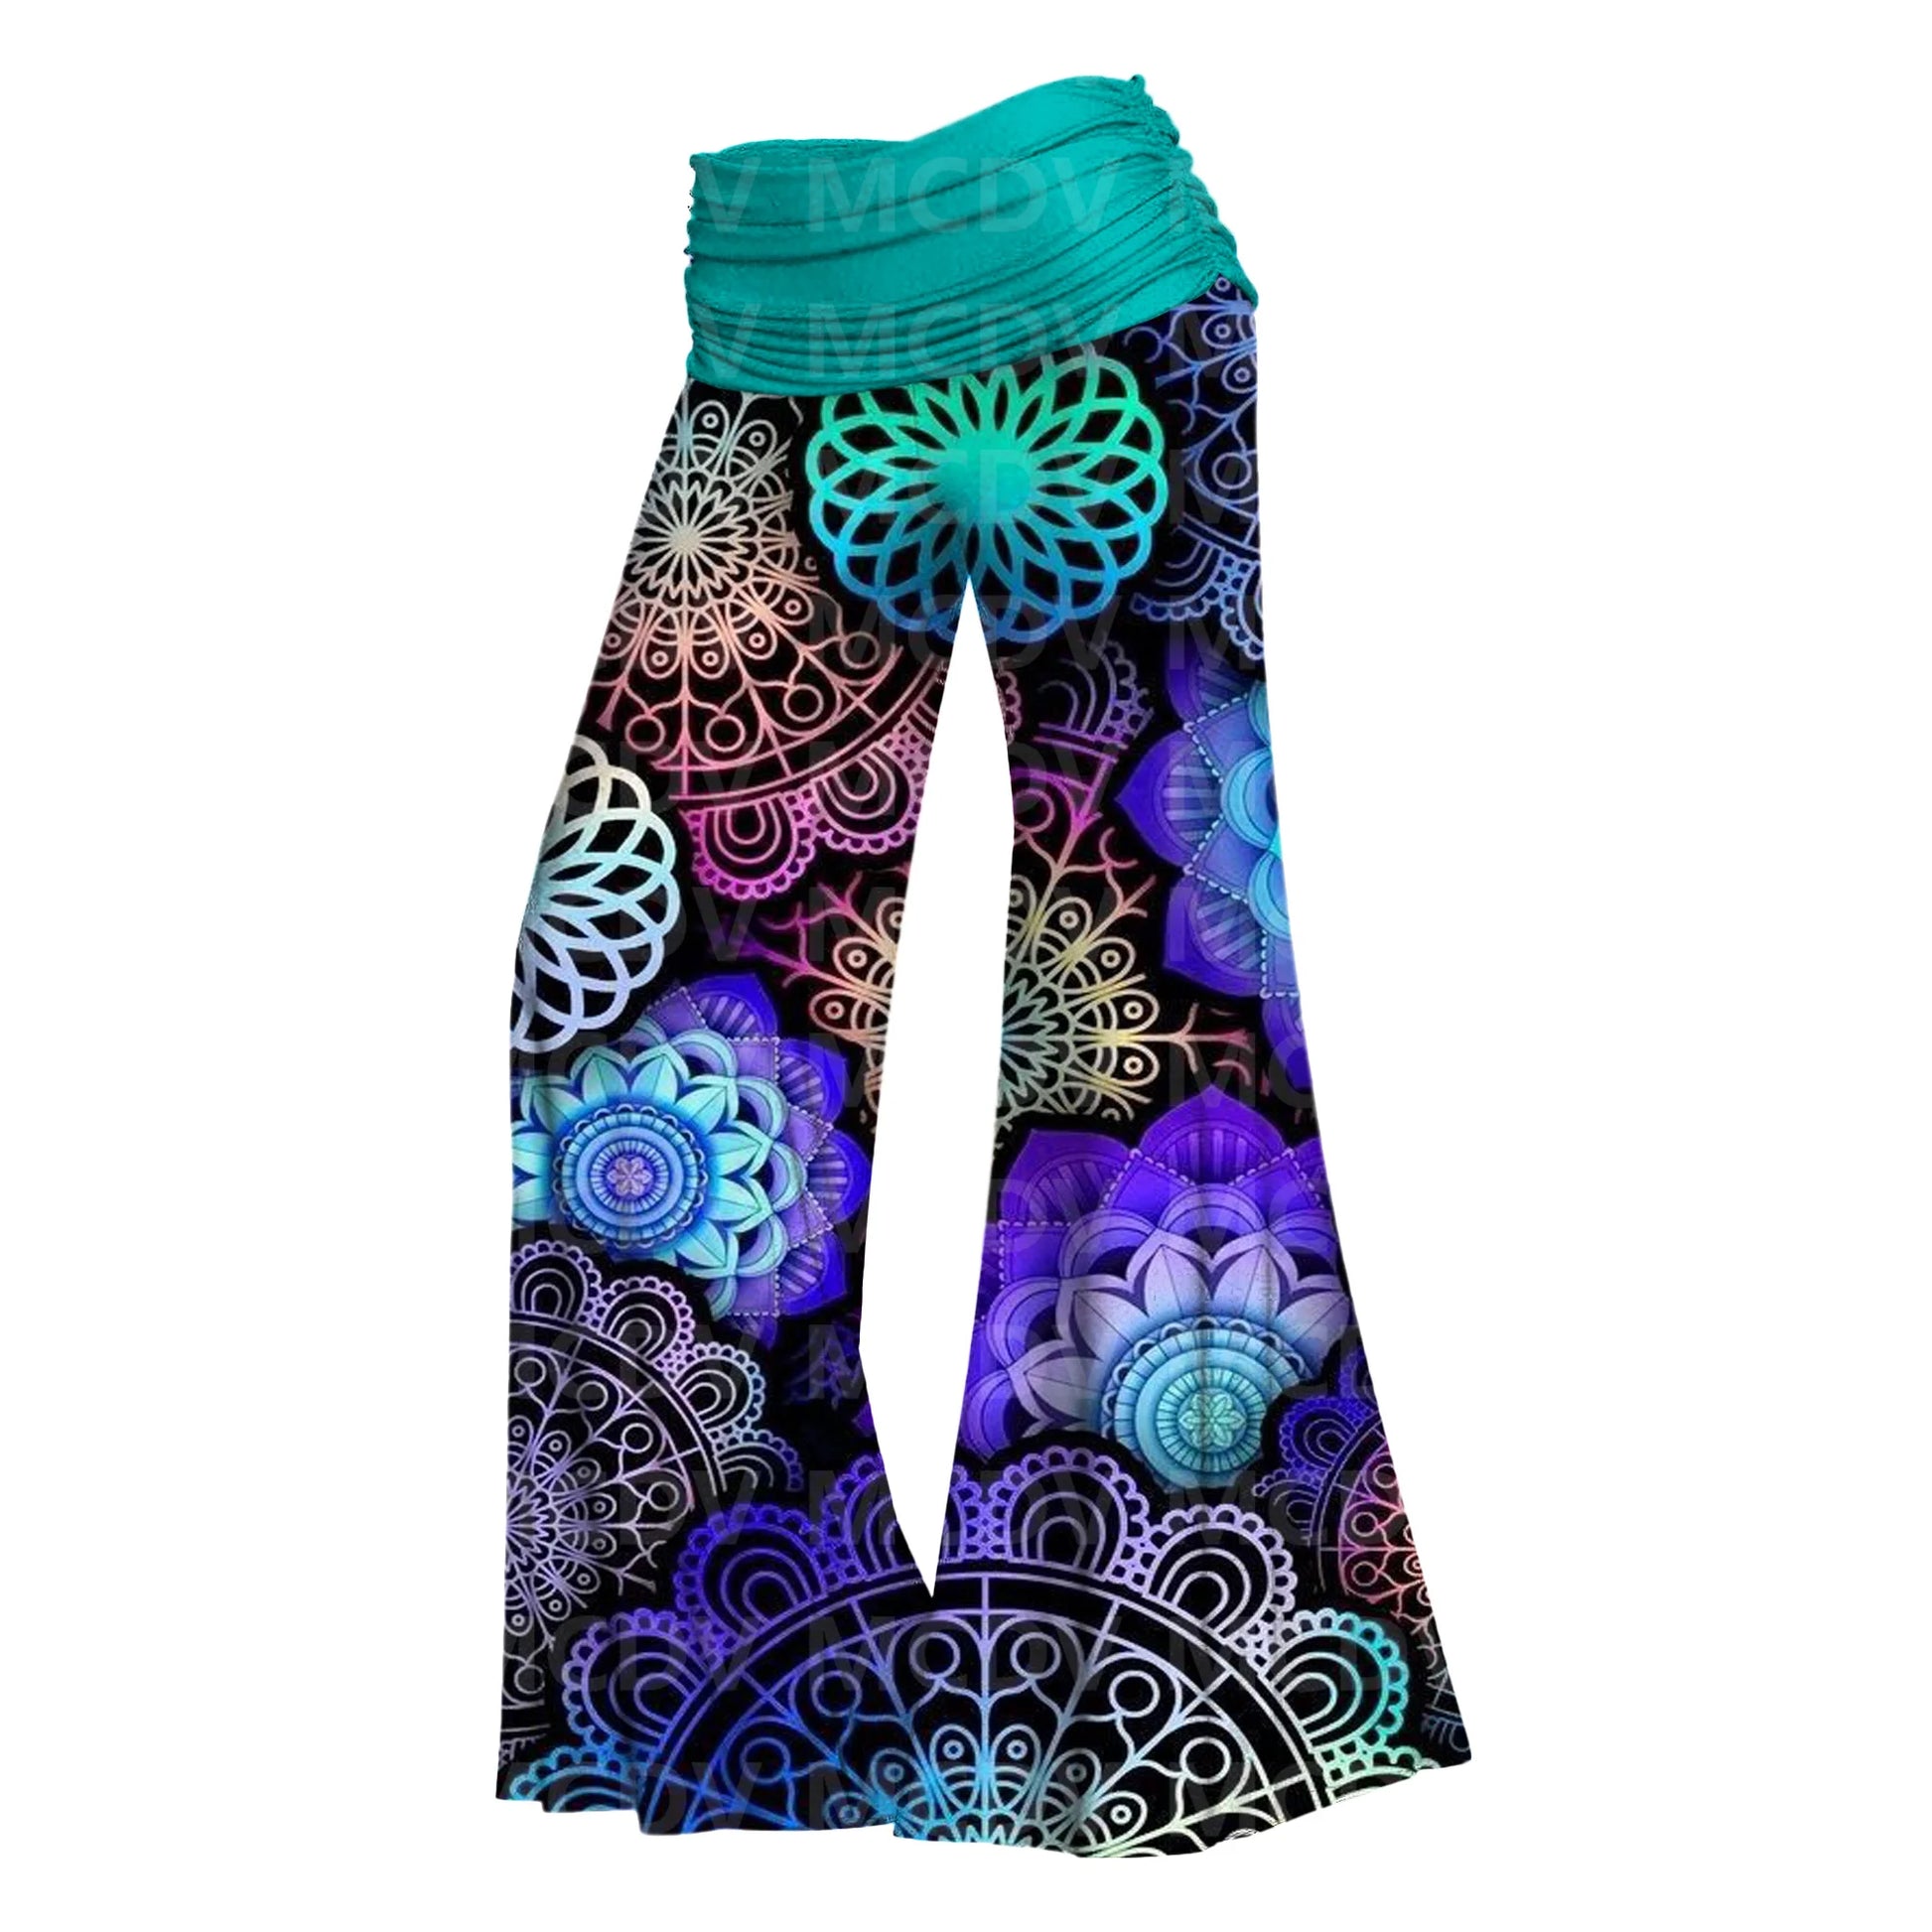 Women's Wide Leg Pants Yoga Psychedelic  Printed Women's Casual Pants 5 Color